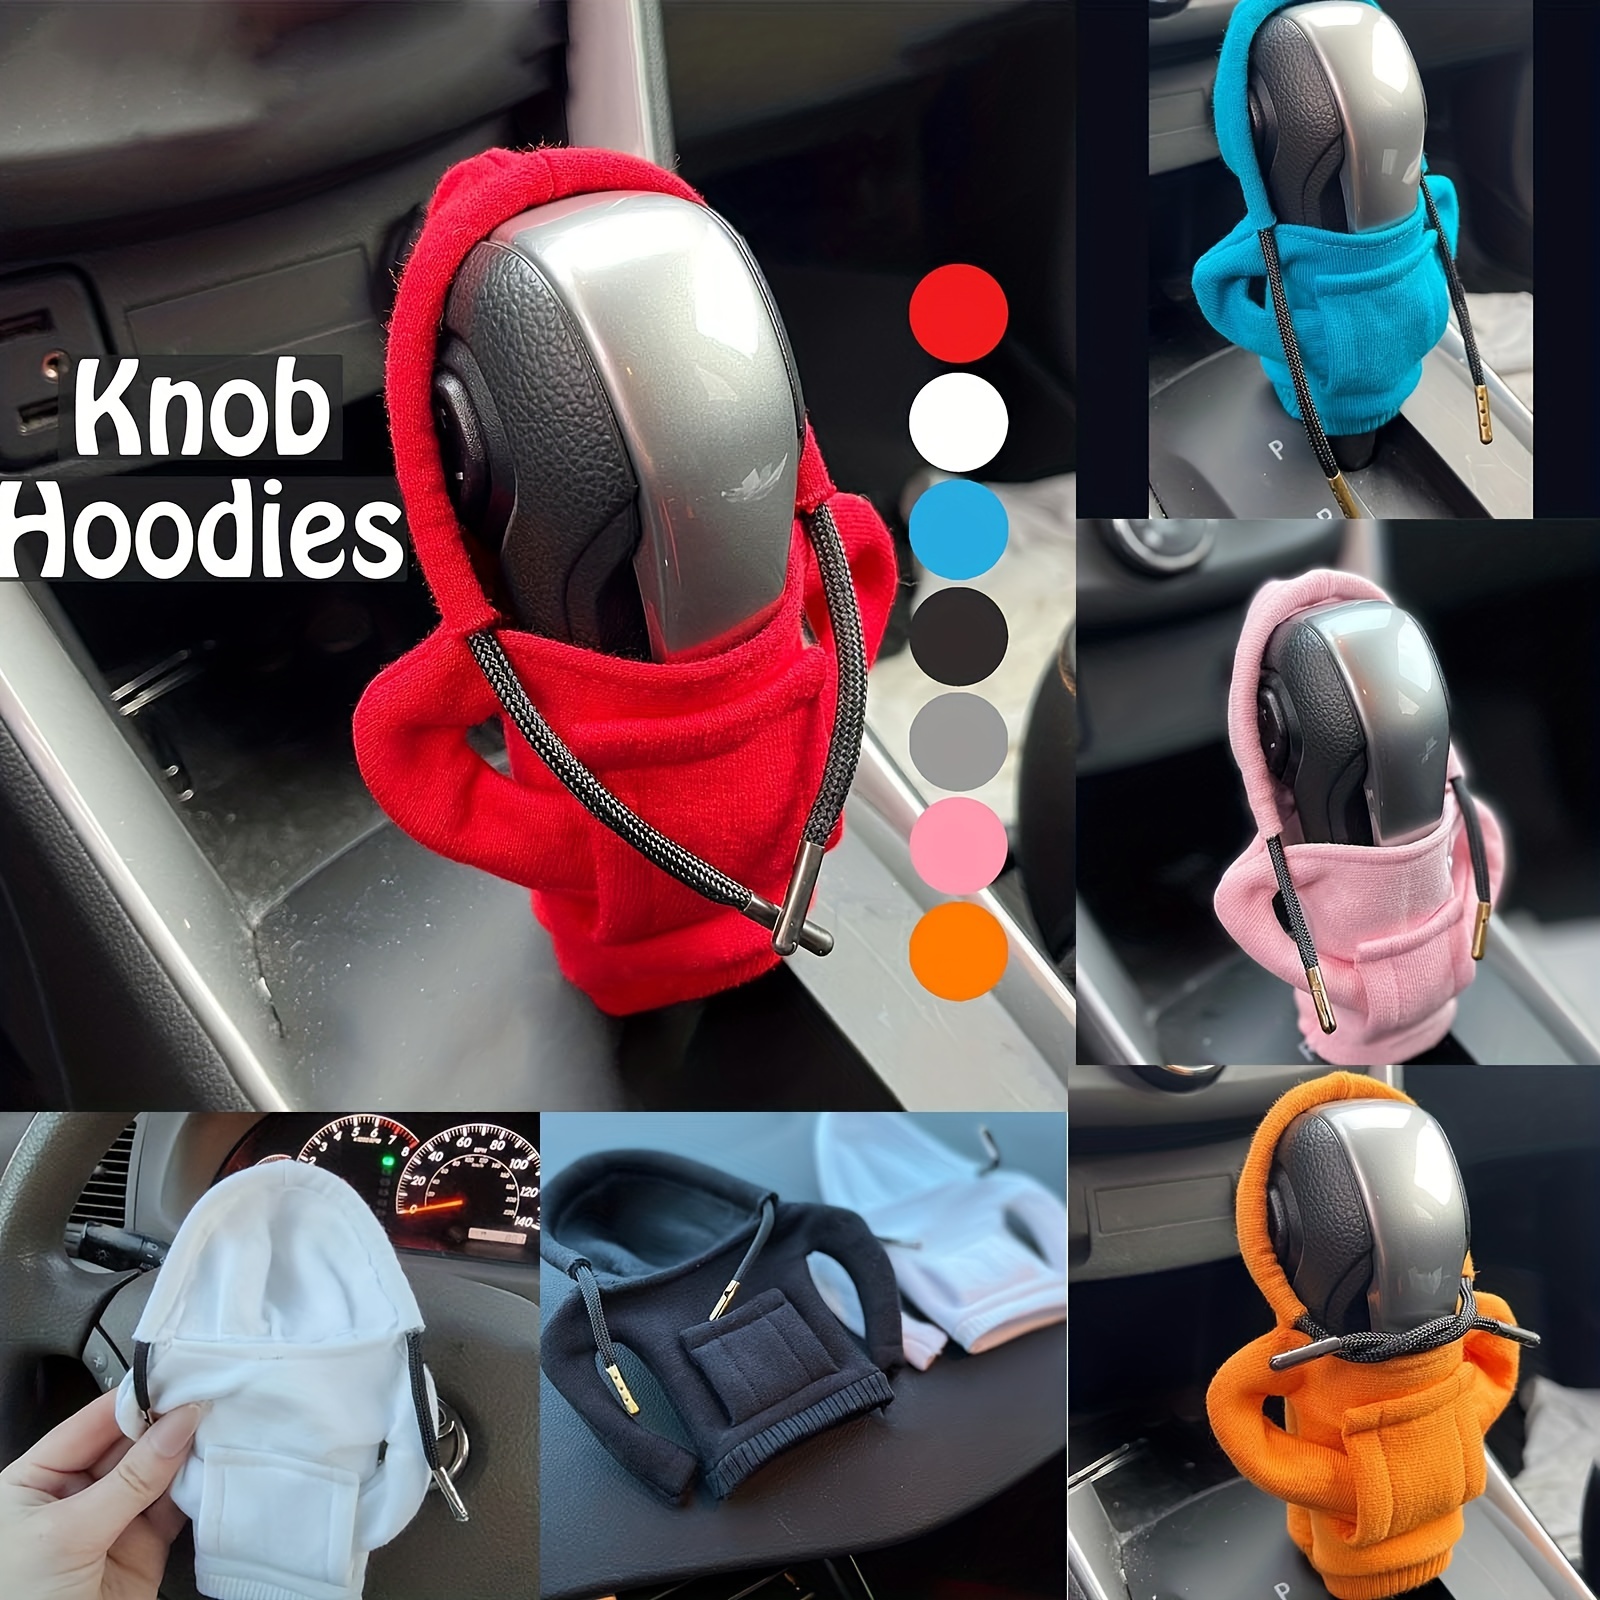 1Pcs Gear Shift Hoodie , Funny Hoodie Car Gear Shift Cover, Winter Warm Car  Shifter Hoodie Cover Sweatshirt, Auto Interior Decoration Novelty Gift